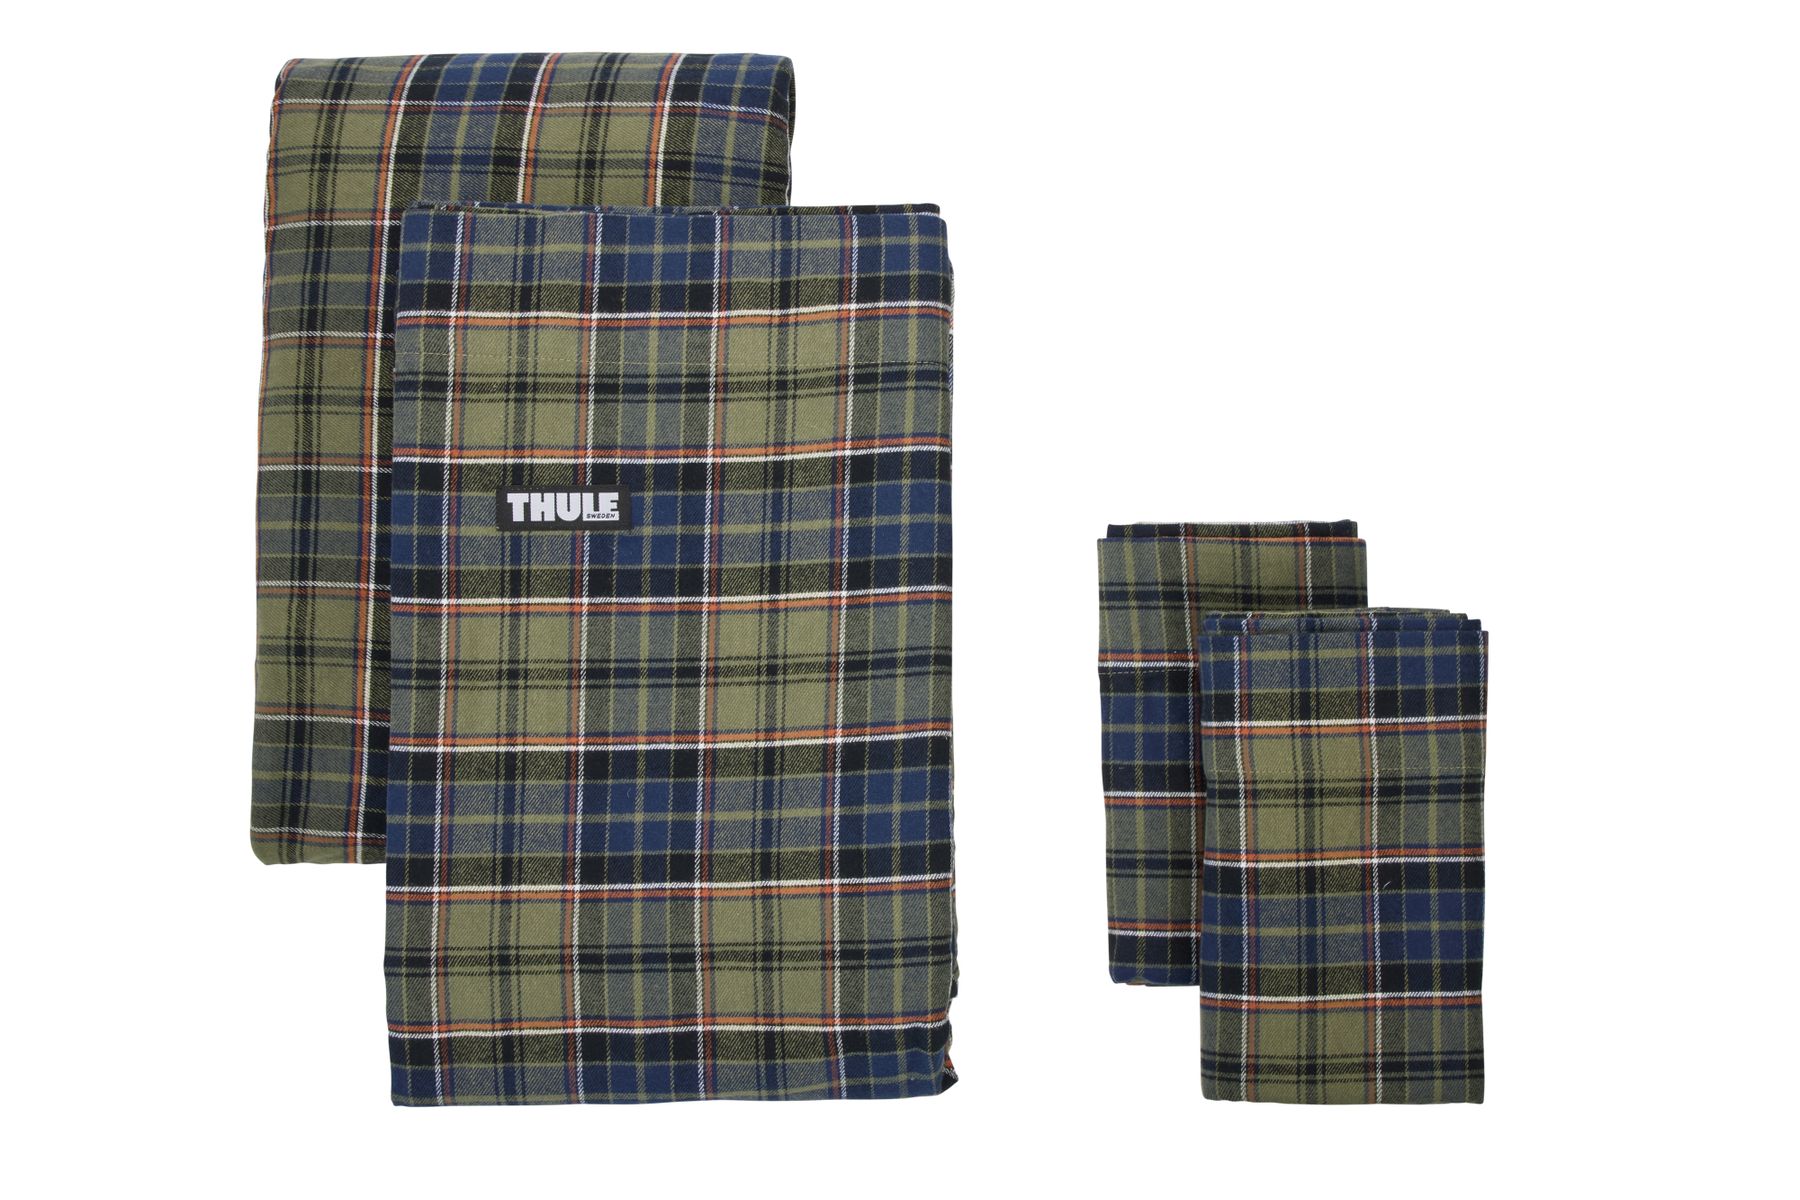 Thule Flannel Sheets 901822